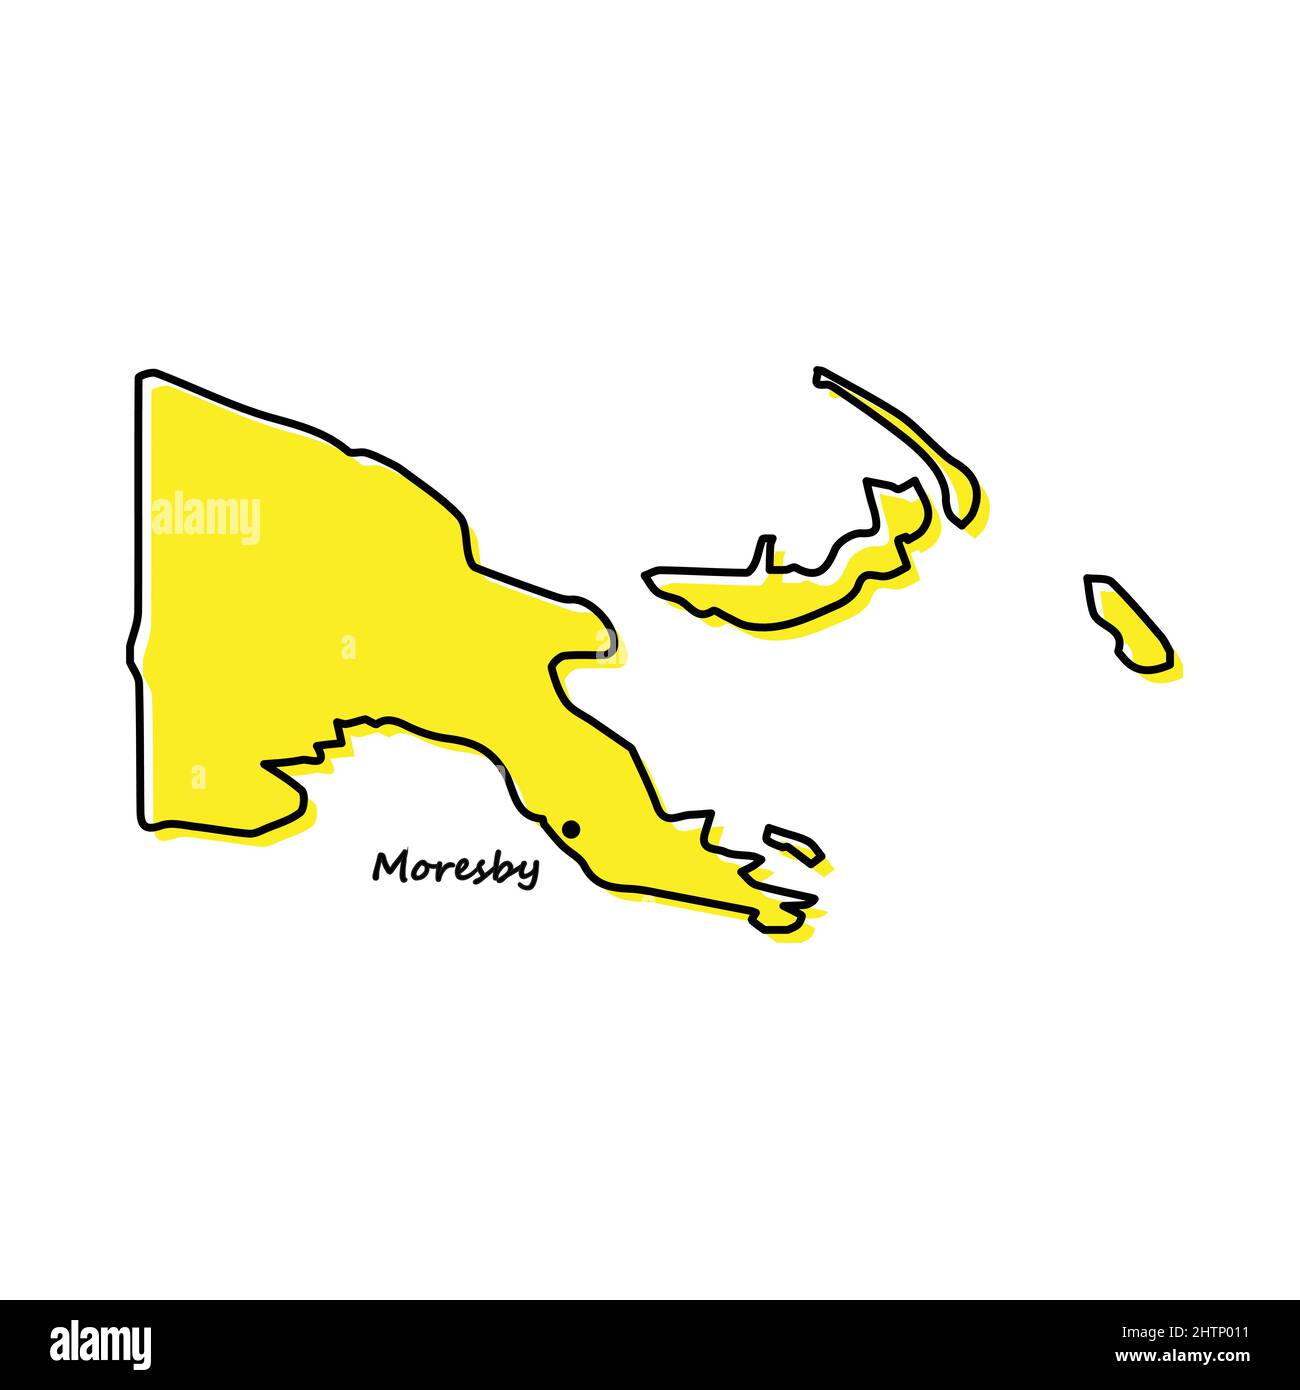 Simple outline map of Papua New Guinea with capital location. Stylized minimal line design Stock Vector